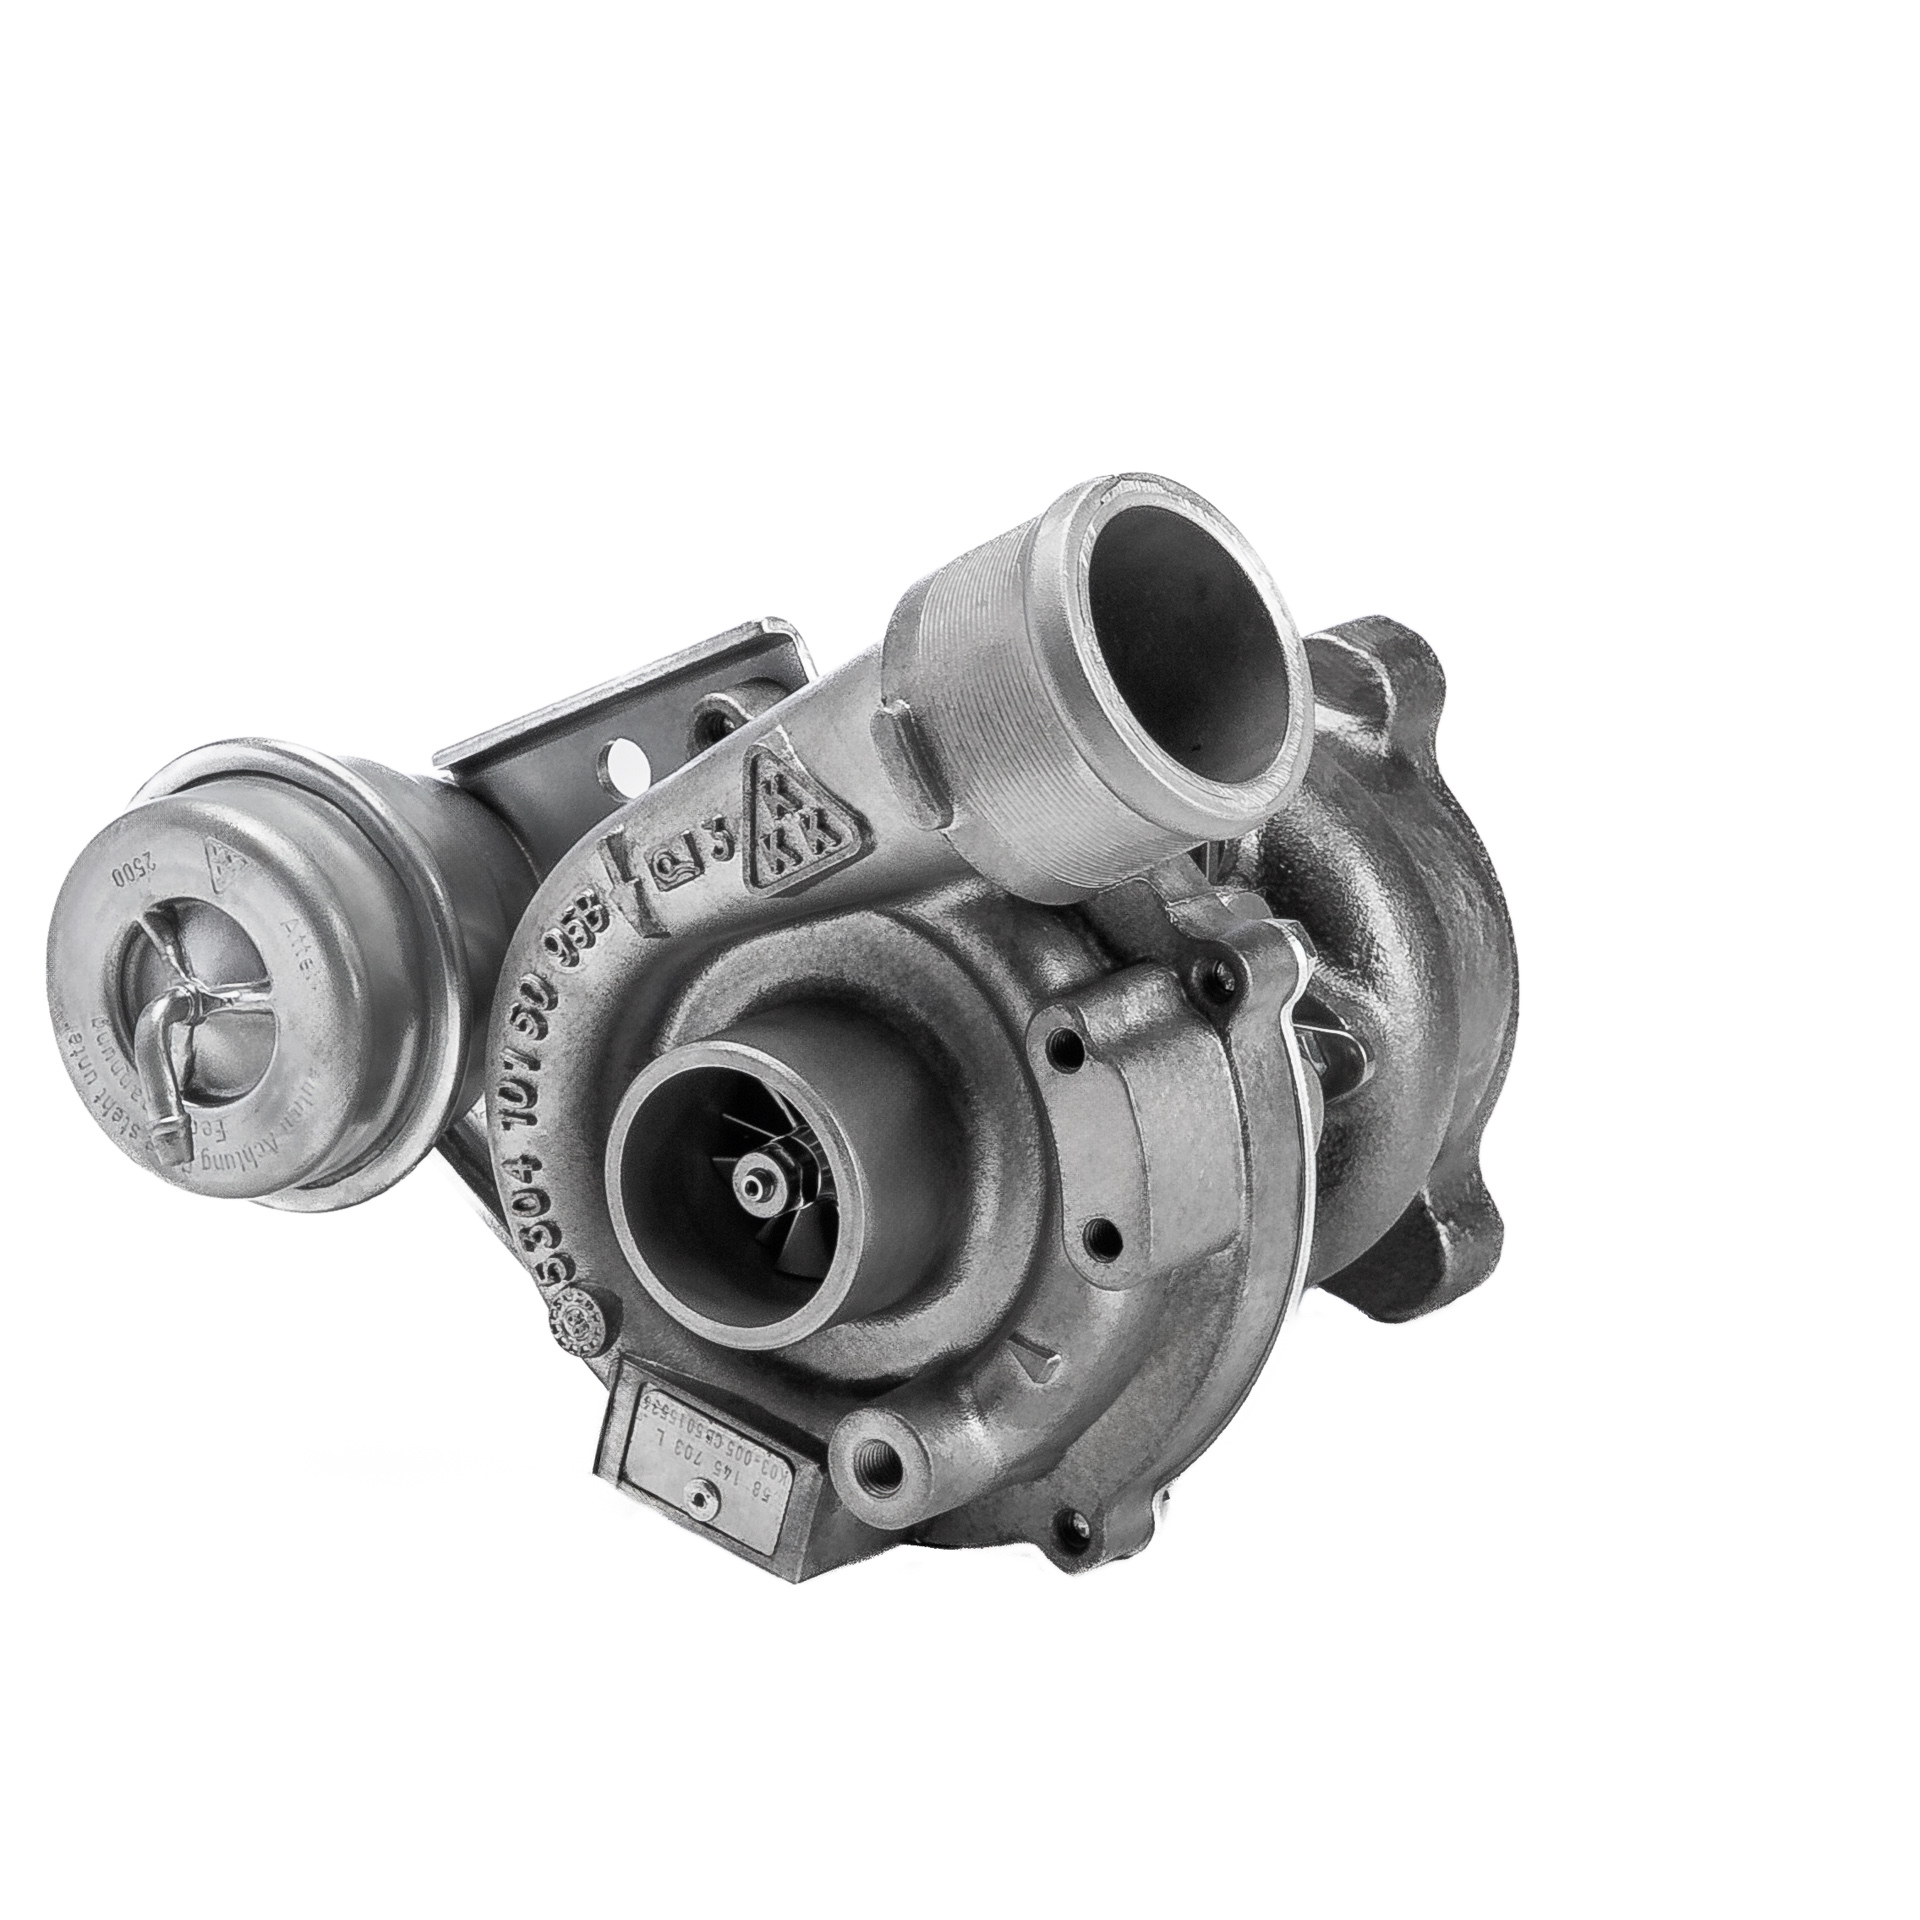 BR Turbo 53039880005RS Turbocharger 058 145 703 H